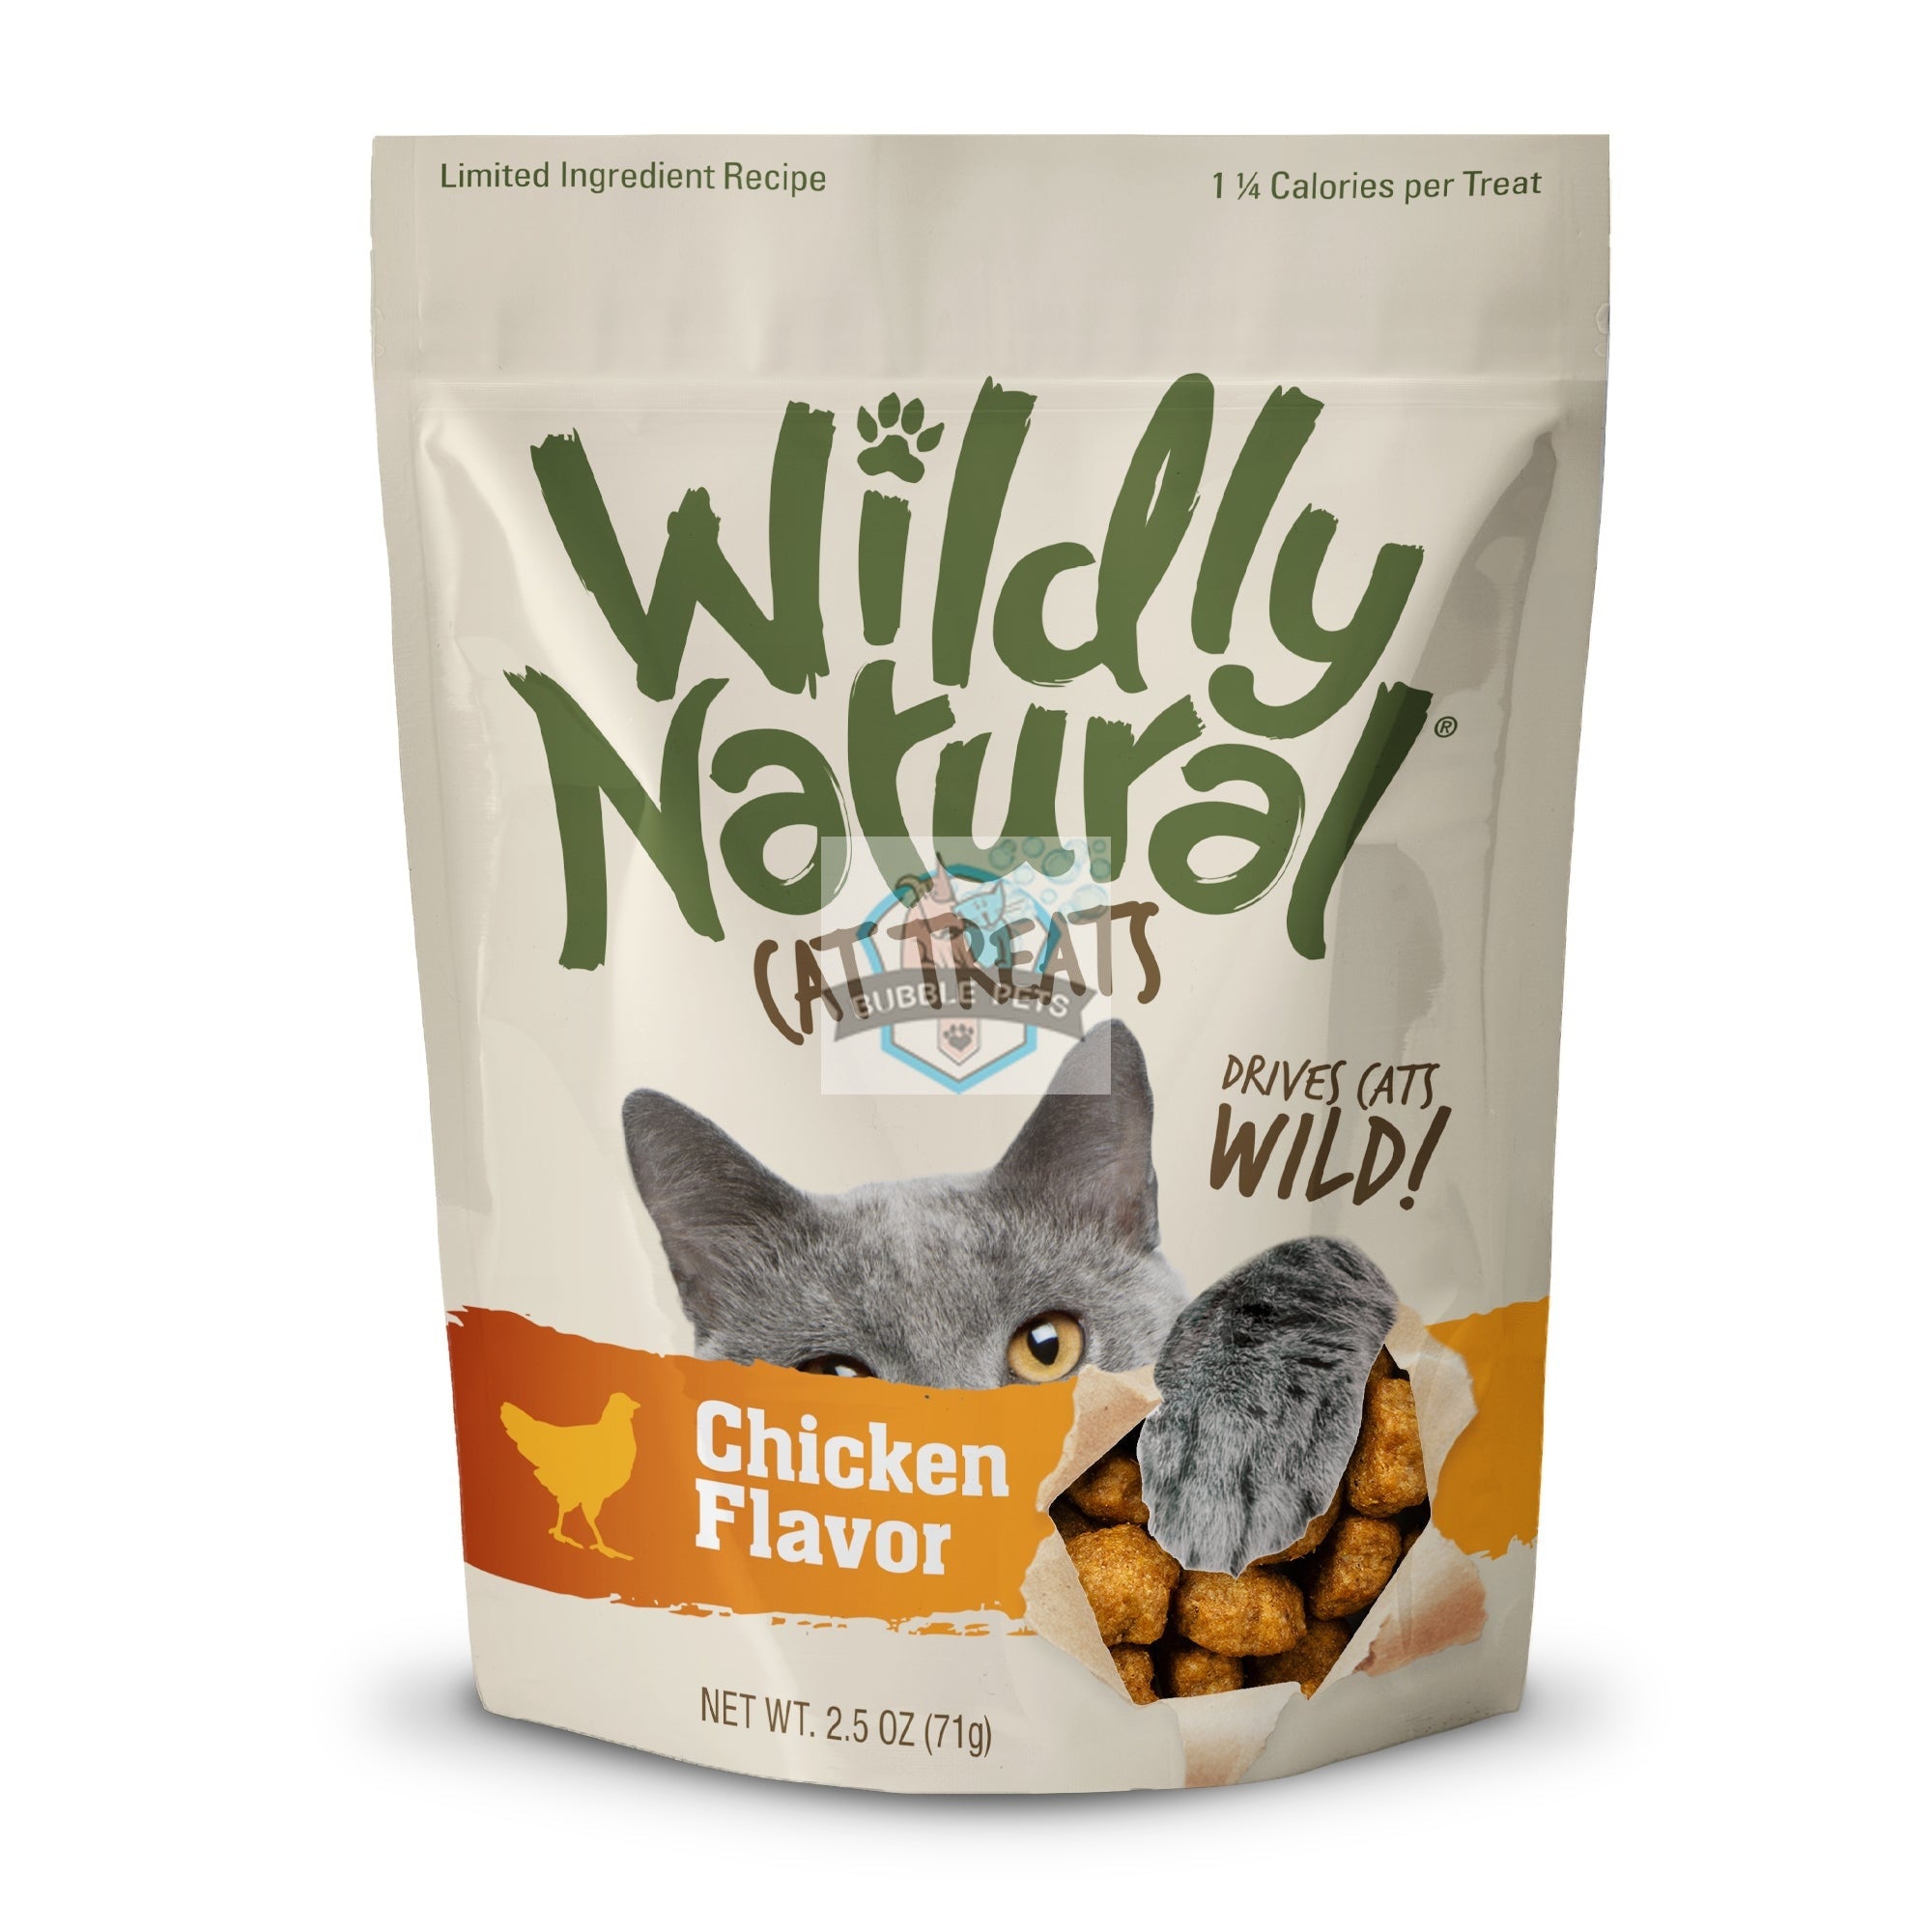 Fruitables Wildly Natural Free Range Chicken Cat Treats